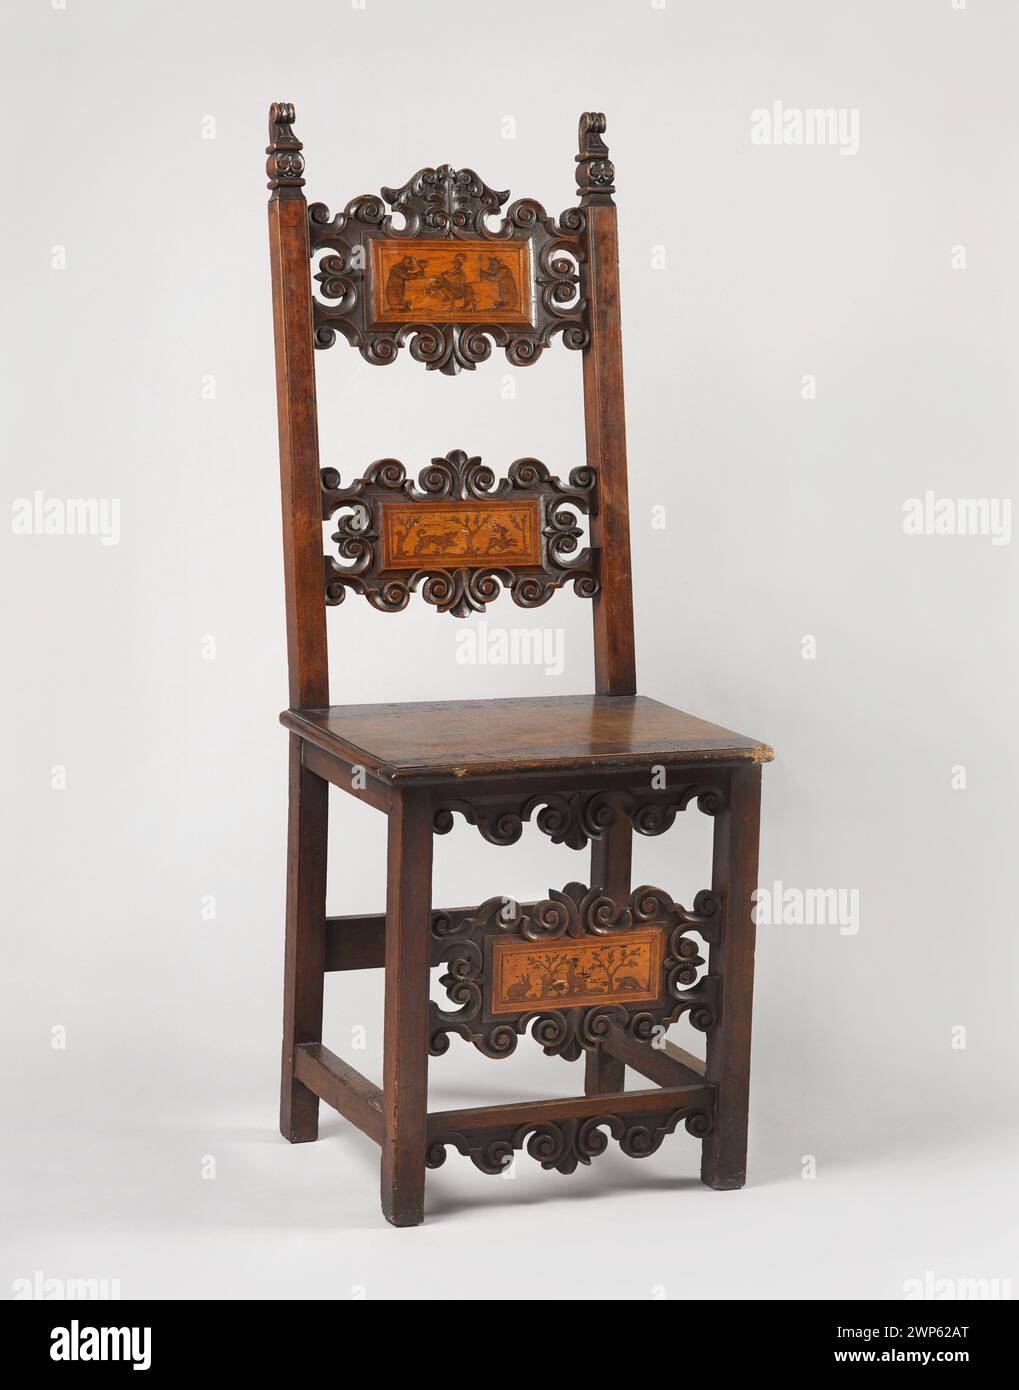 Chair;  beginning of the 17th century; 4. W. 19th century (1601-00-00-1630-00-00);deer, foxes, bears, dogs, elephants, volutes, hares, animals Stock Photo